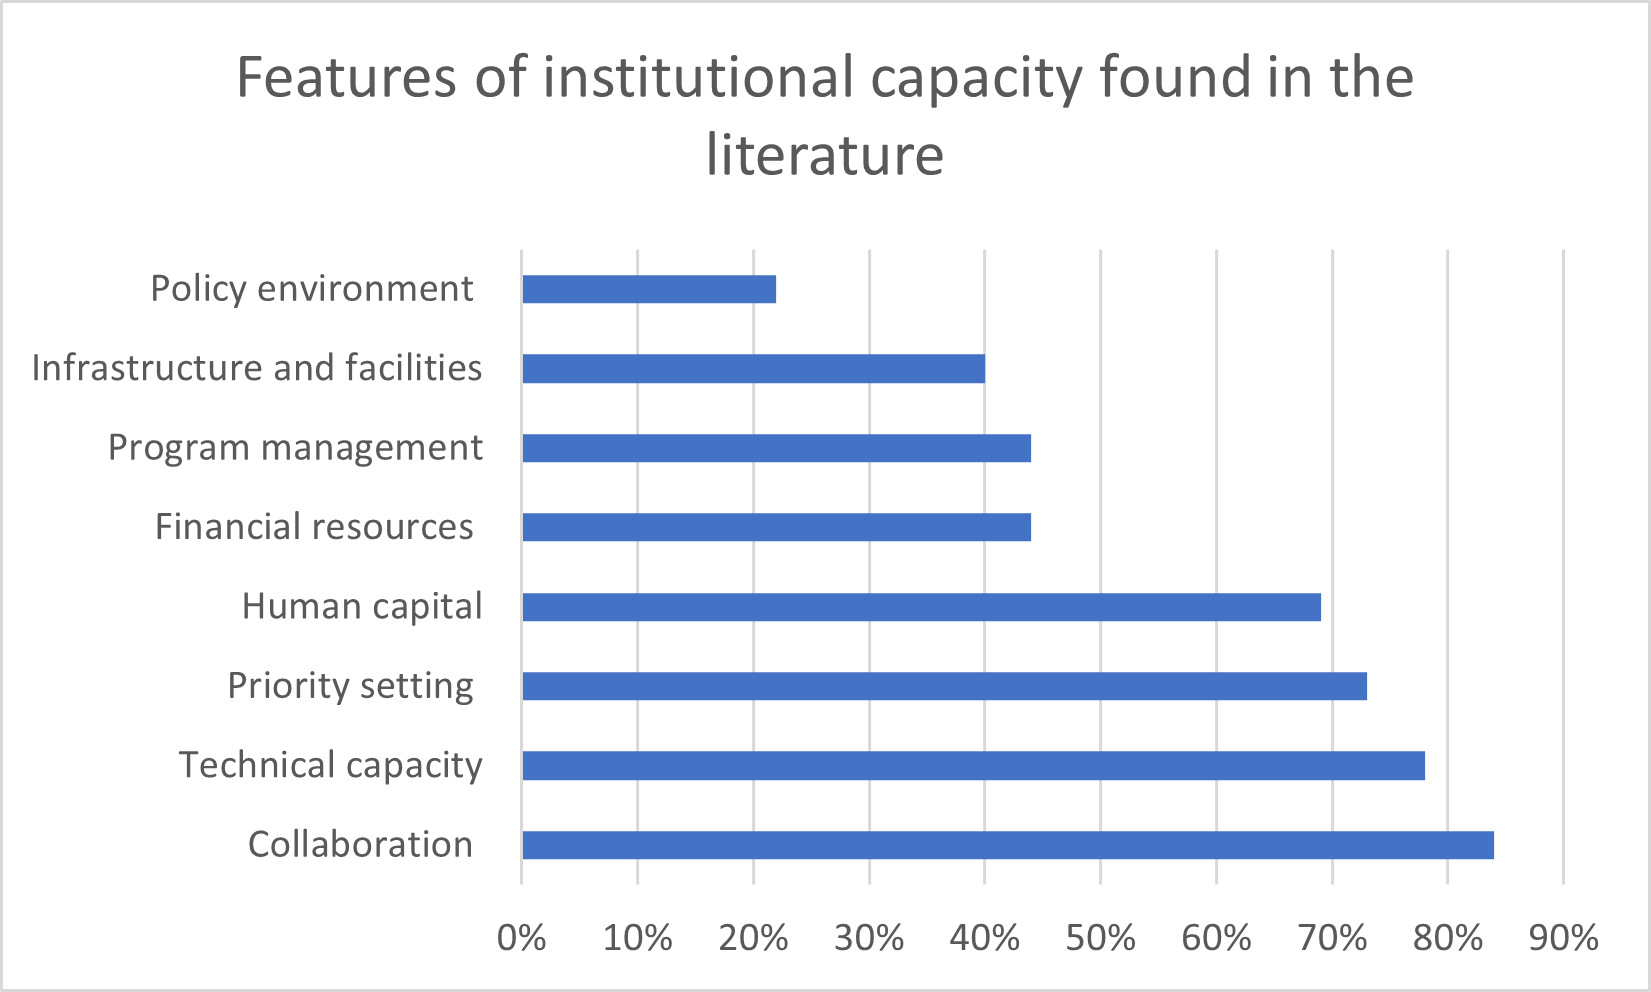 Features of institutional capacity found in the literature: Policy environment (20%); Infrastructure and facilities (40%); Program management (45%); Financial resources (45%); Human capital (70%); Priority setting (70%); Technical capacity (80%); Collaboration (85%)